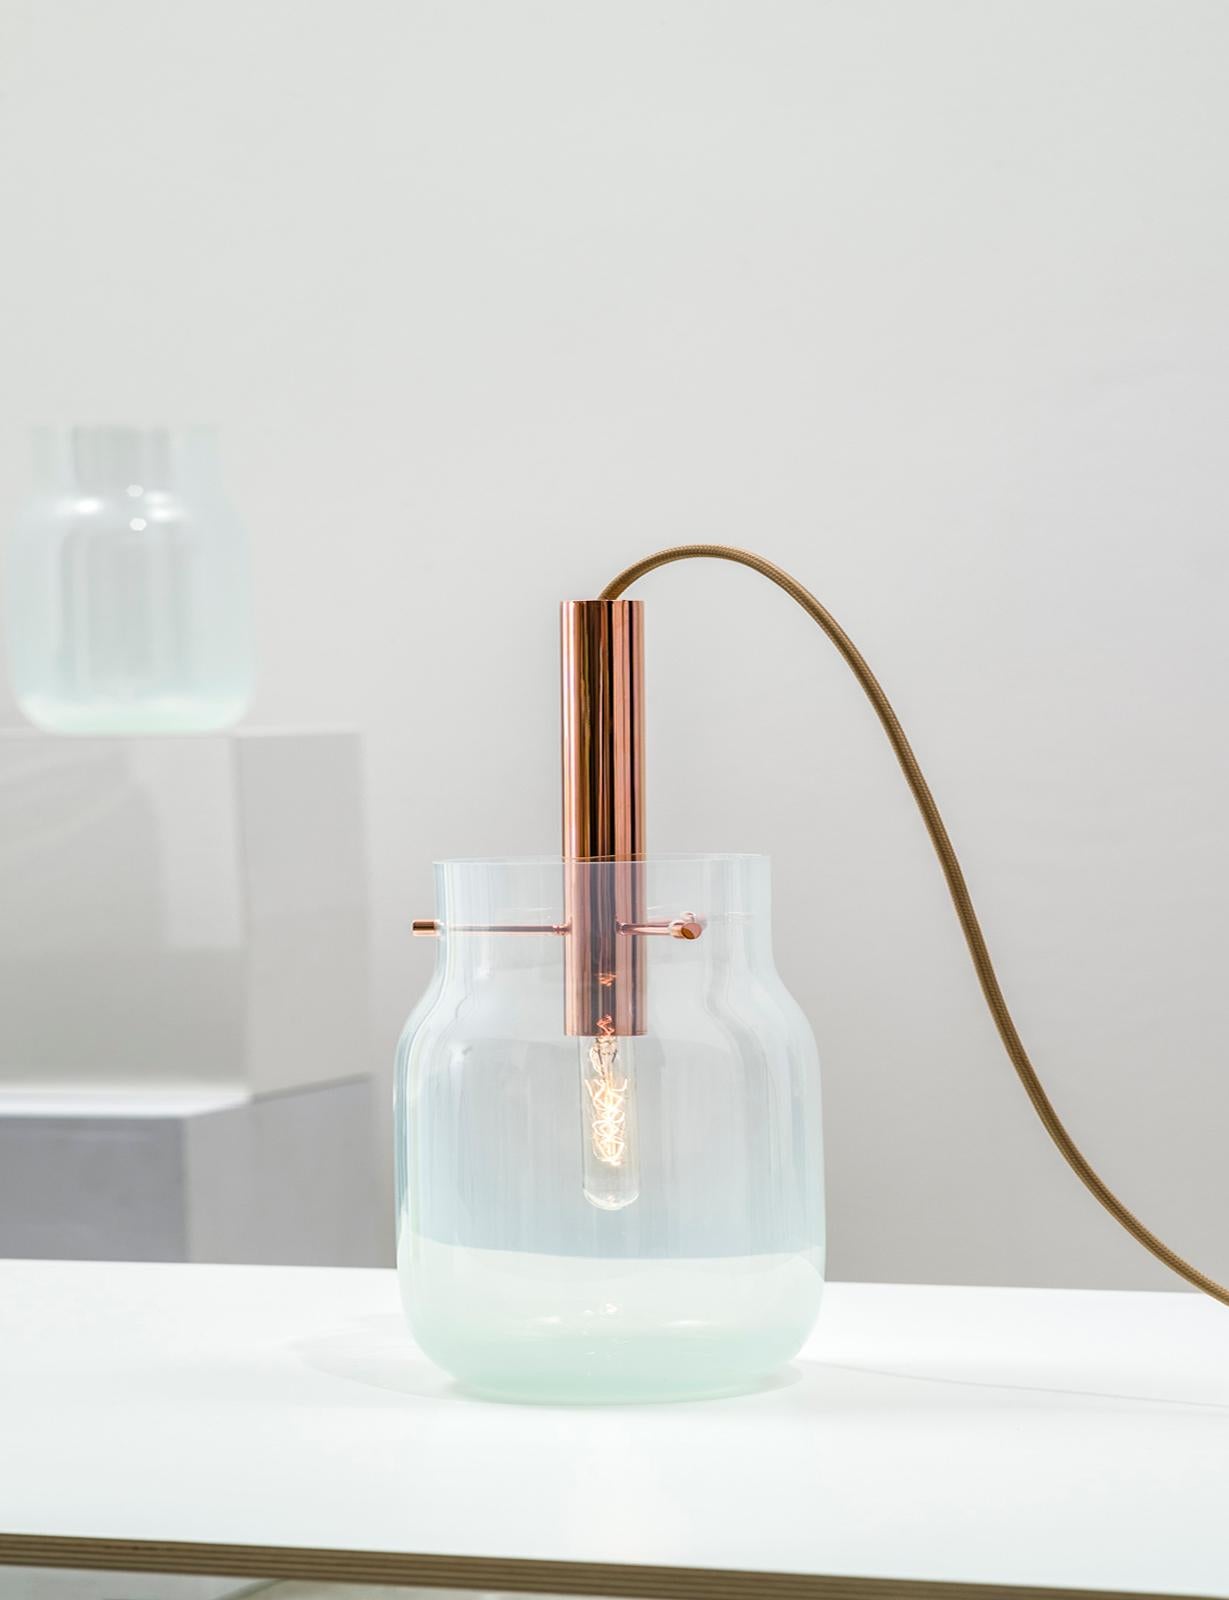 Set of 2 Bandaska table light by Dechem Studio
Dimensions: D 18 x H 24 cm
Materials: brass, gass.
Also available: different colours and sizes available.

Hand-blown into beech wood moulds, Bandaska Lights is based on the highly popular Bandaska